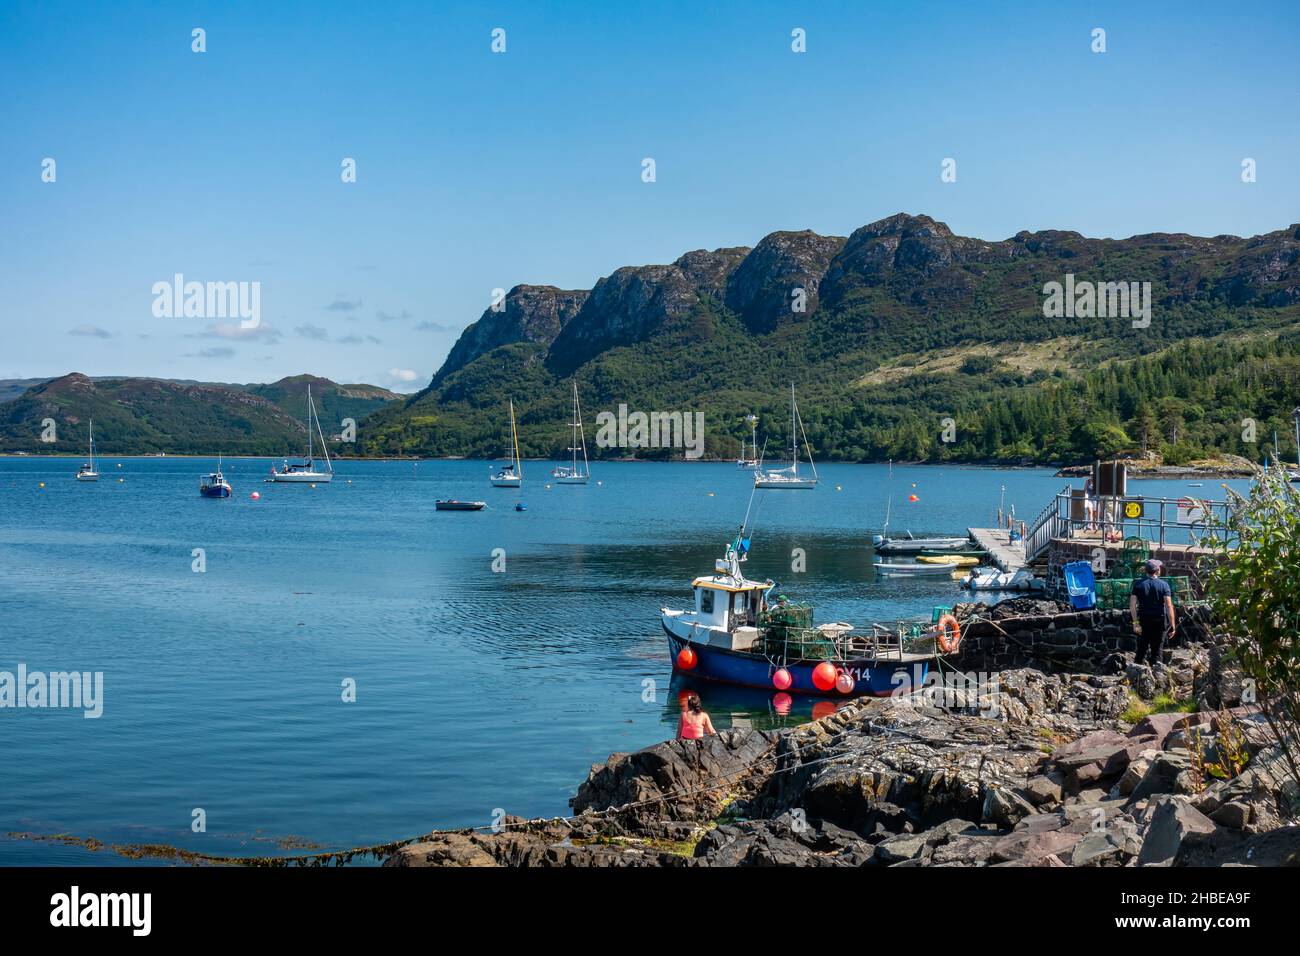 The beautiful village of Plockton, known as the Jewel of the Highlands, which overlooks Loch Carron in Scotland Stock Photo